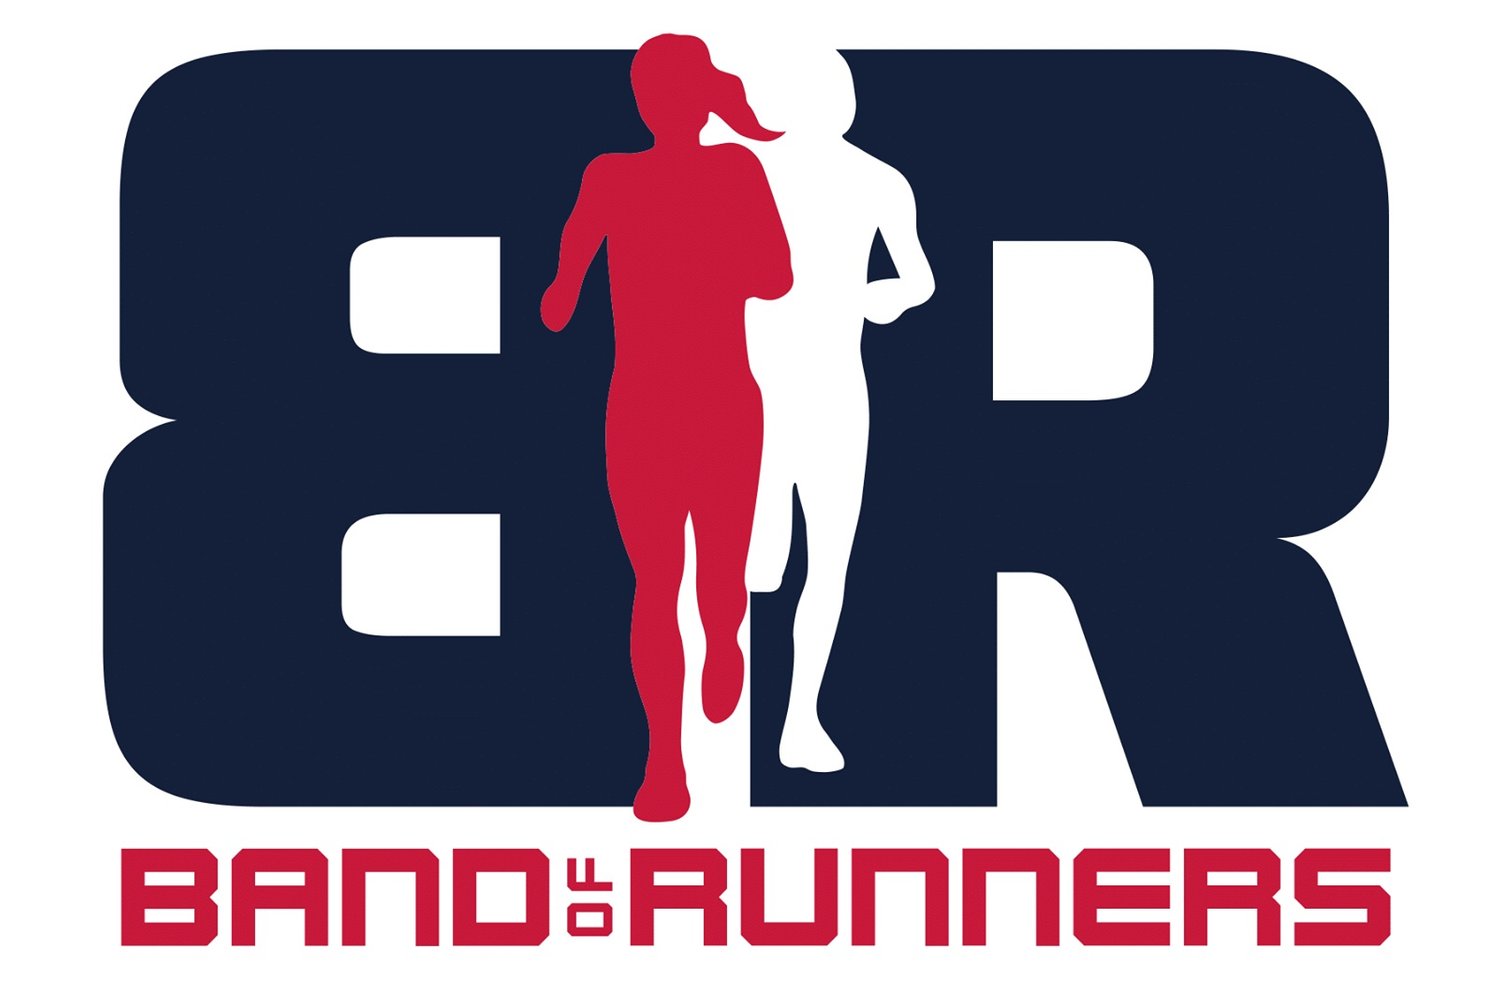 Band of Runners